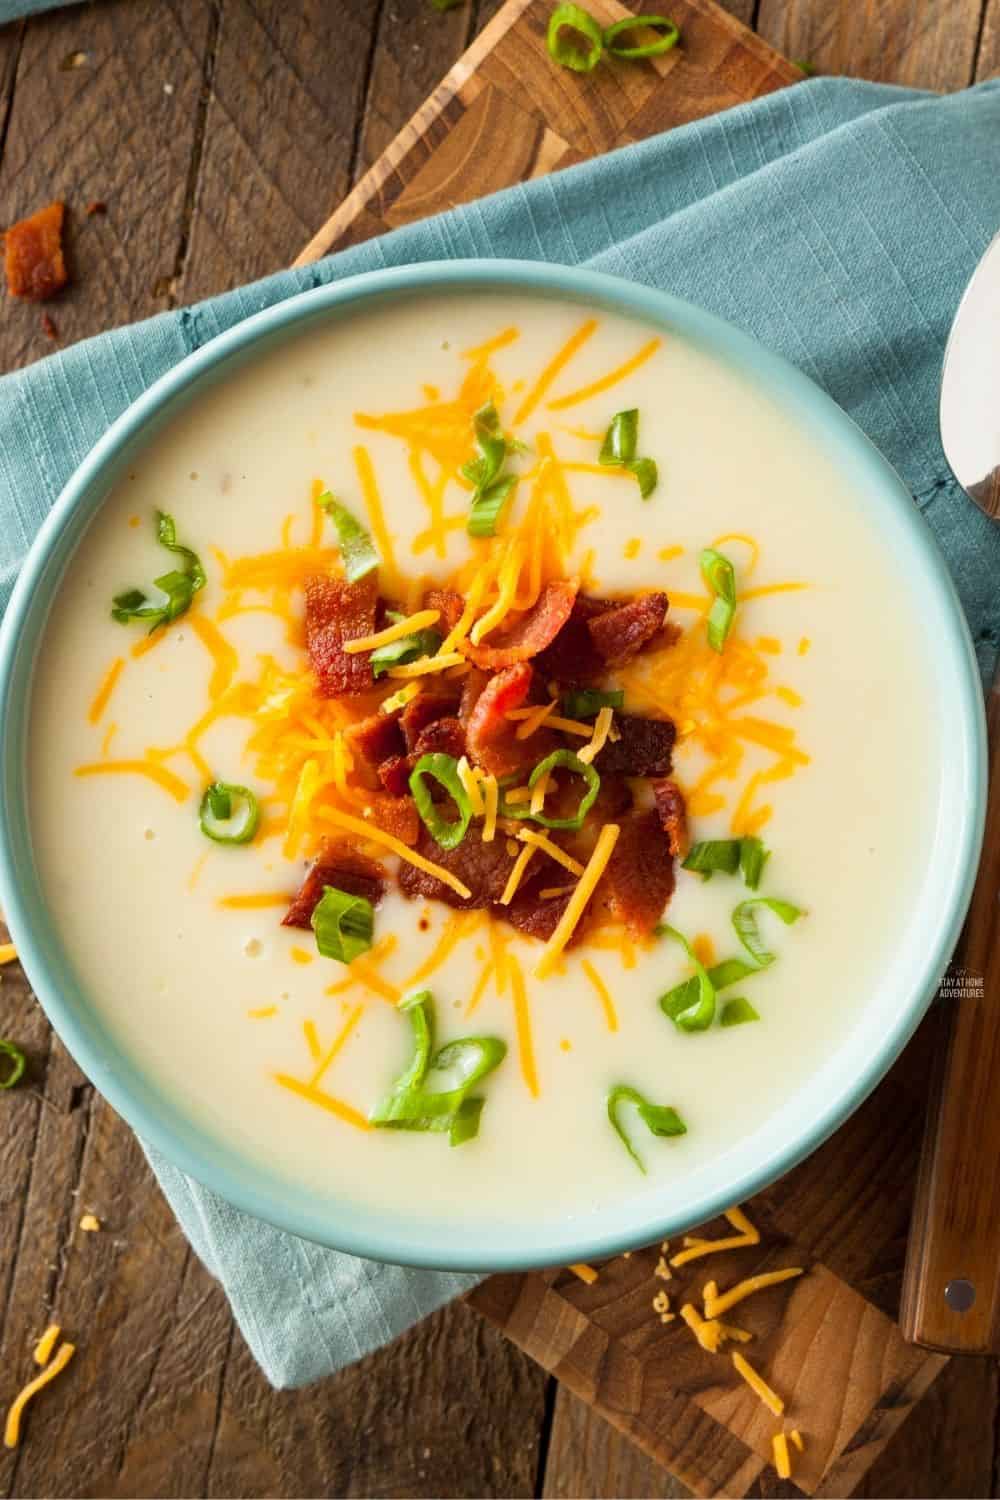 Looking for a great potato soup recipe? Find the best potato soups made with an Instant Pot from ham and potato to leek and potato. via @mystayathome